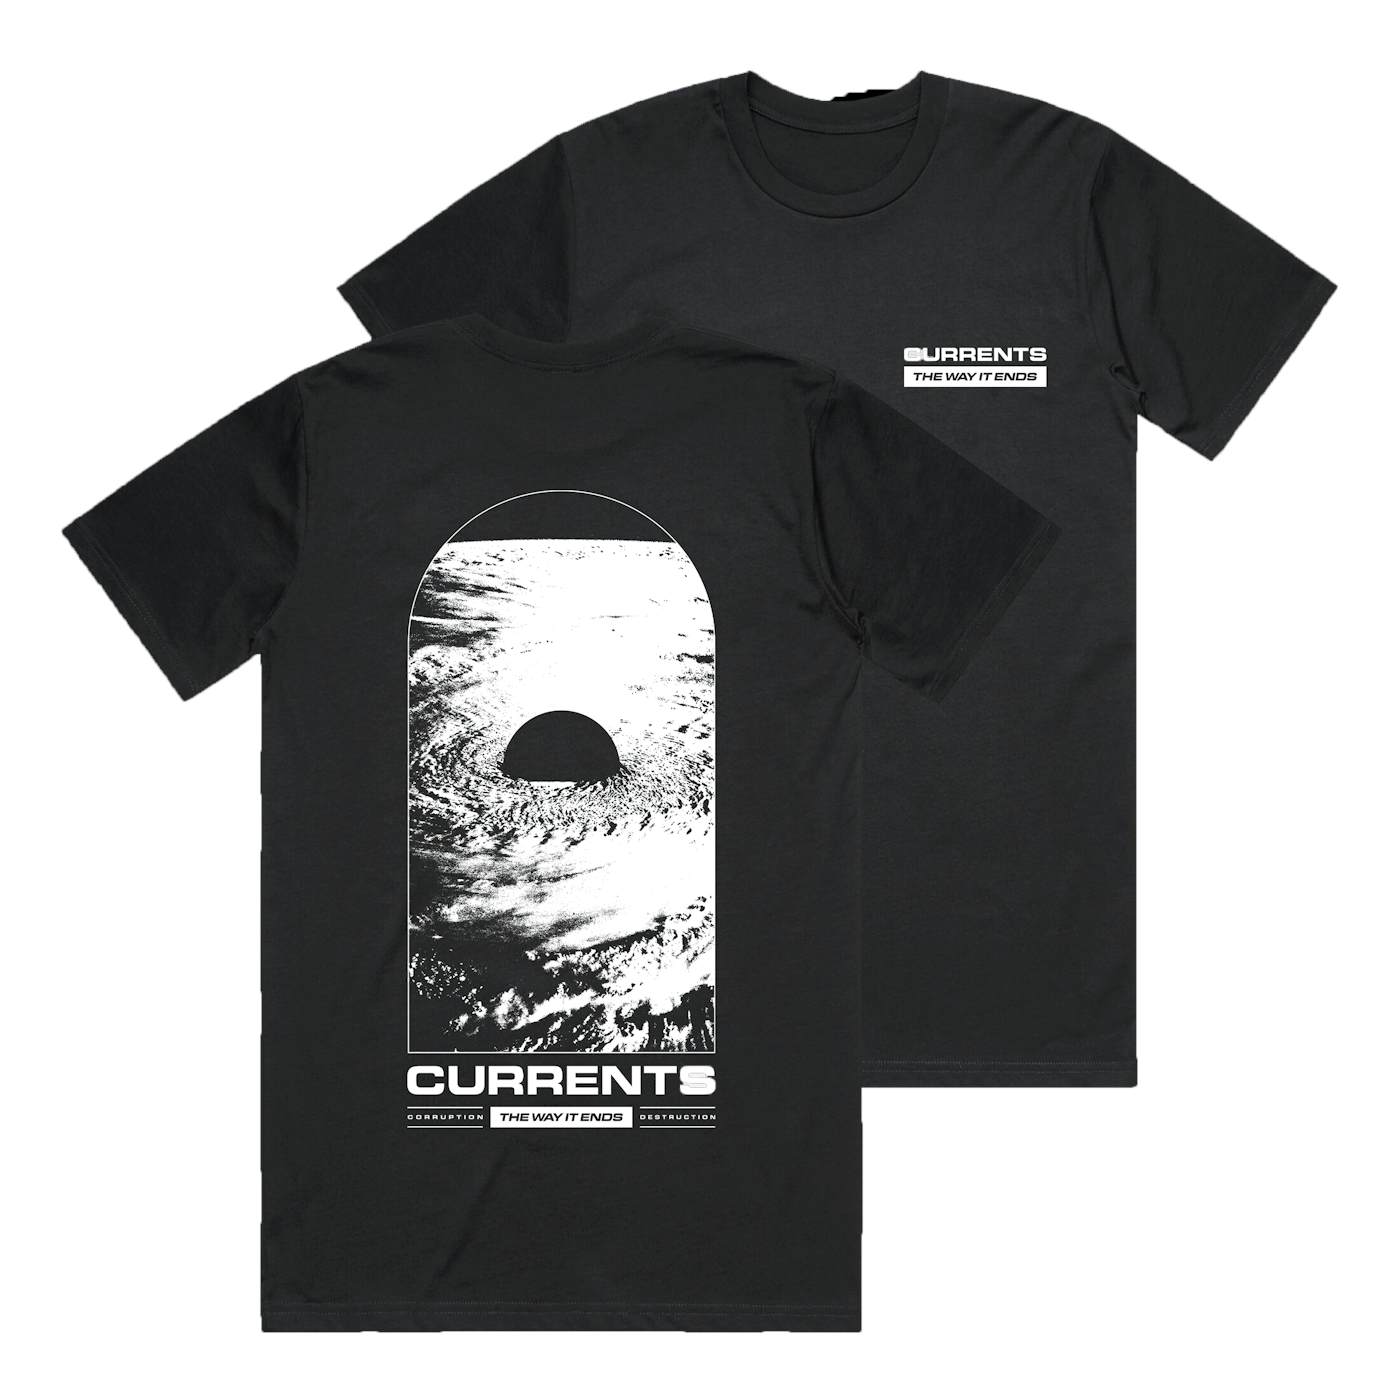 Currents "Eye of the Storm" Shirt